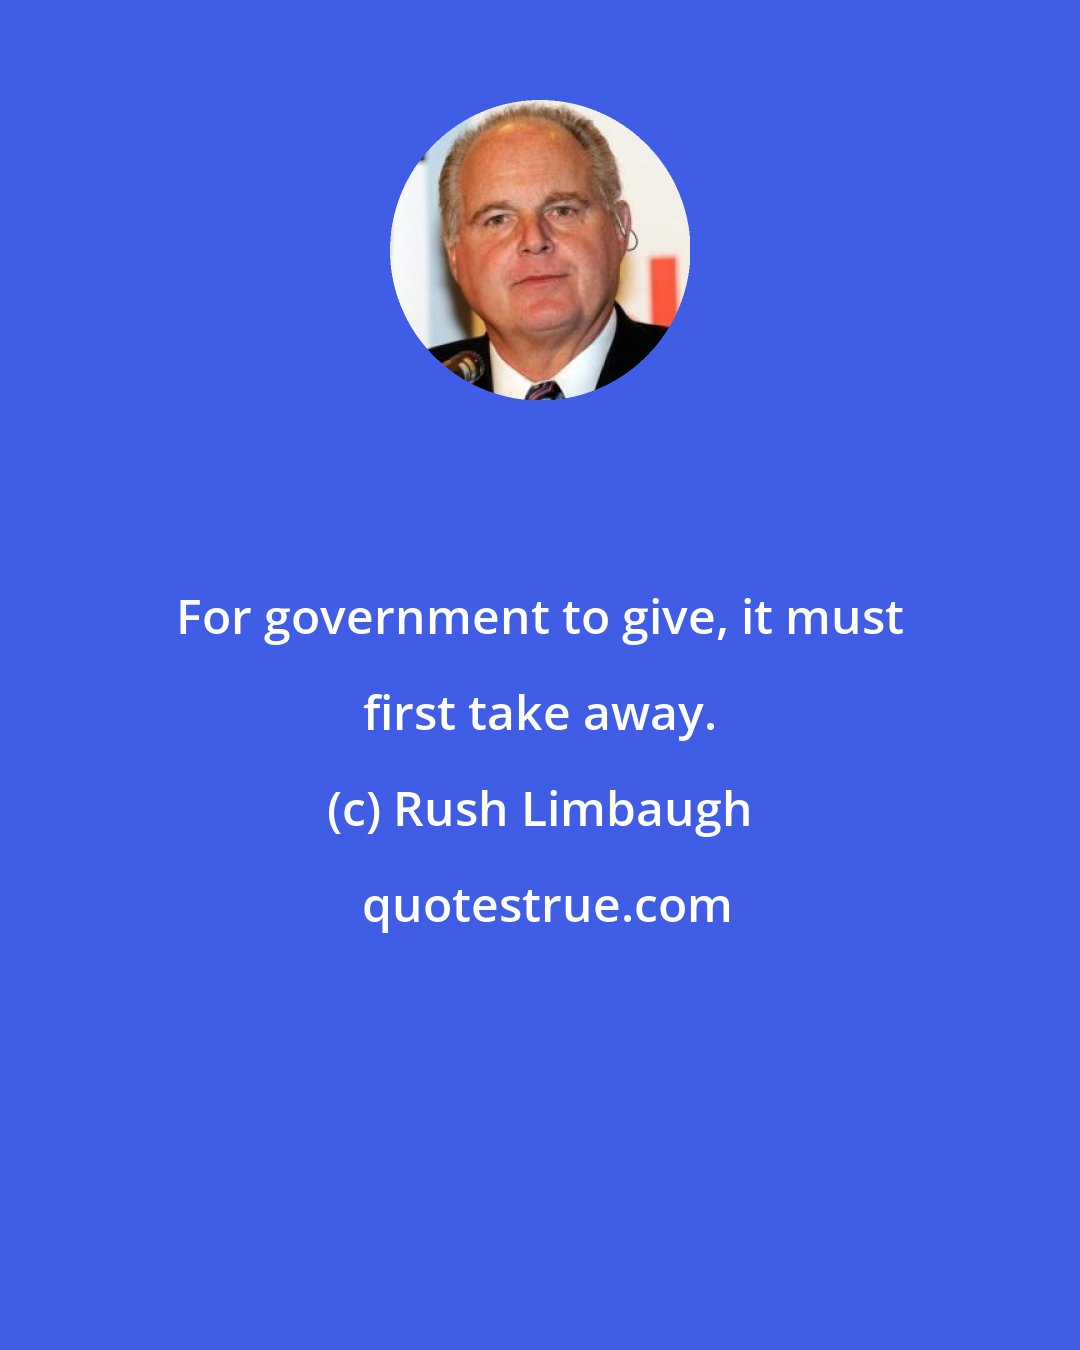 Rush Limbaugh: For government to give, it must first take away.